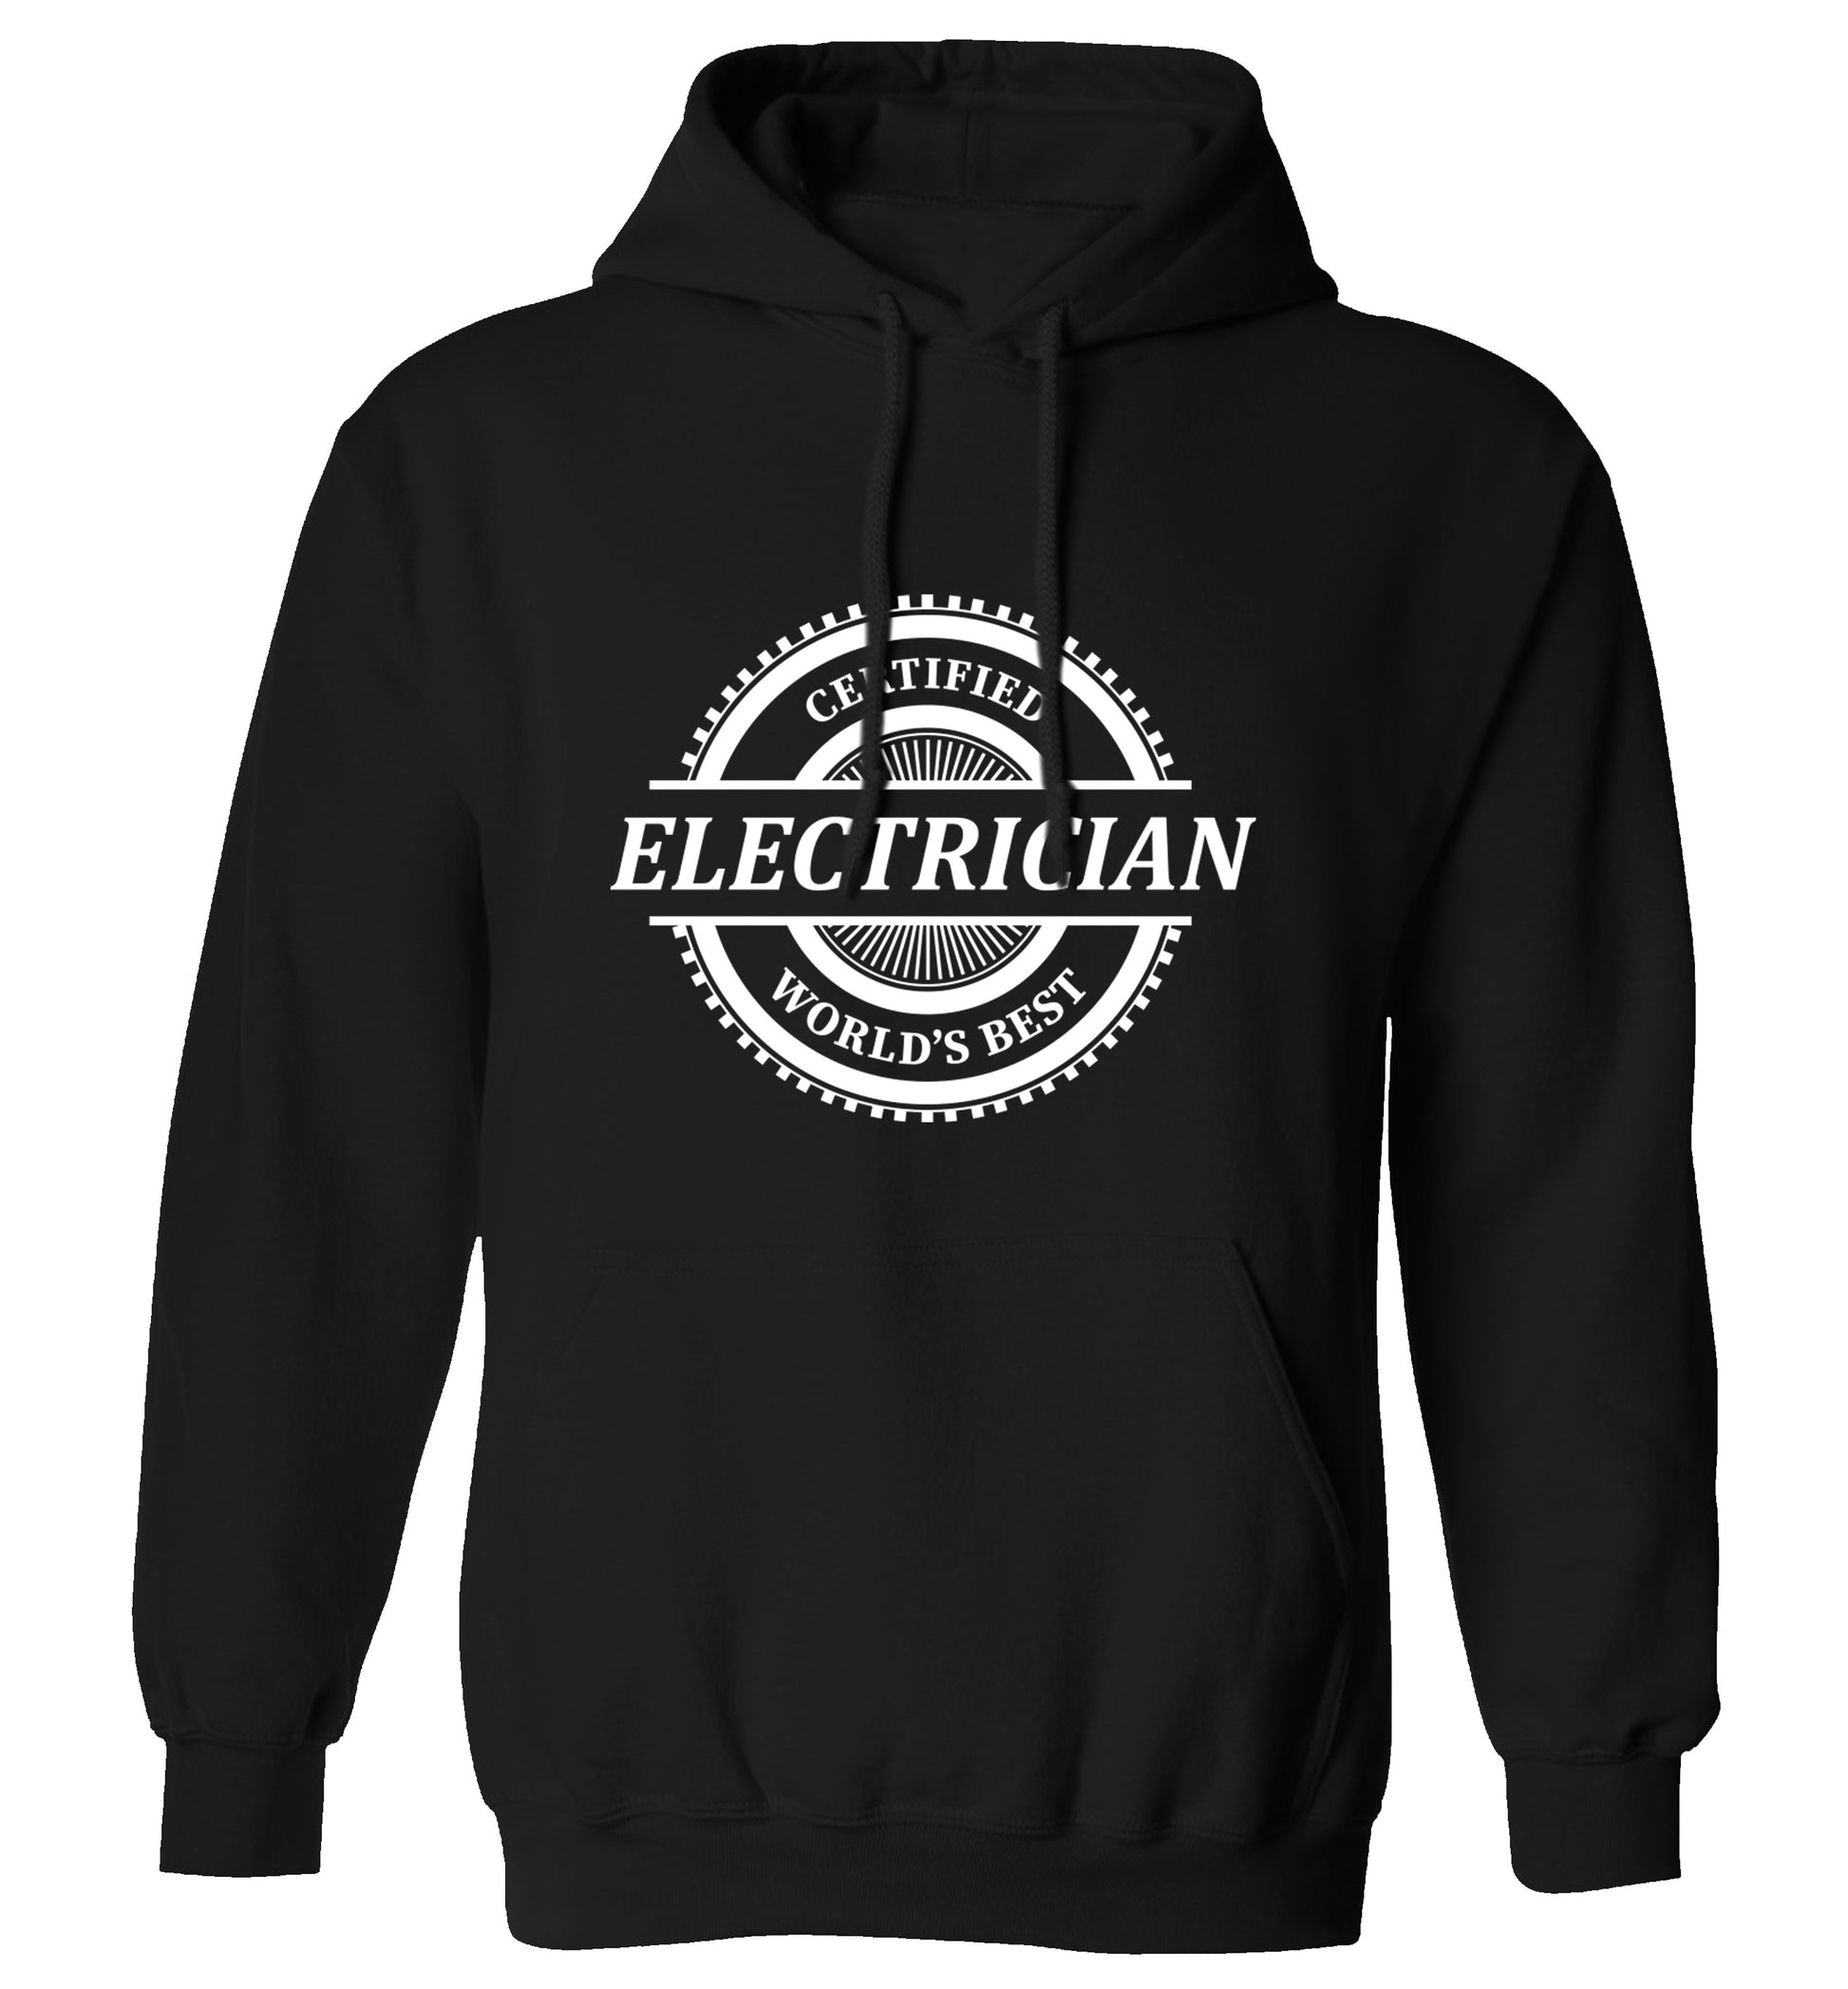 Worlds greatest electrician adults unisex black hoodie 2XL